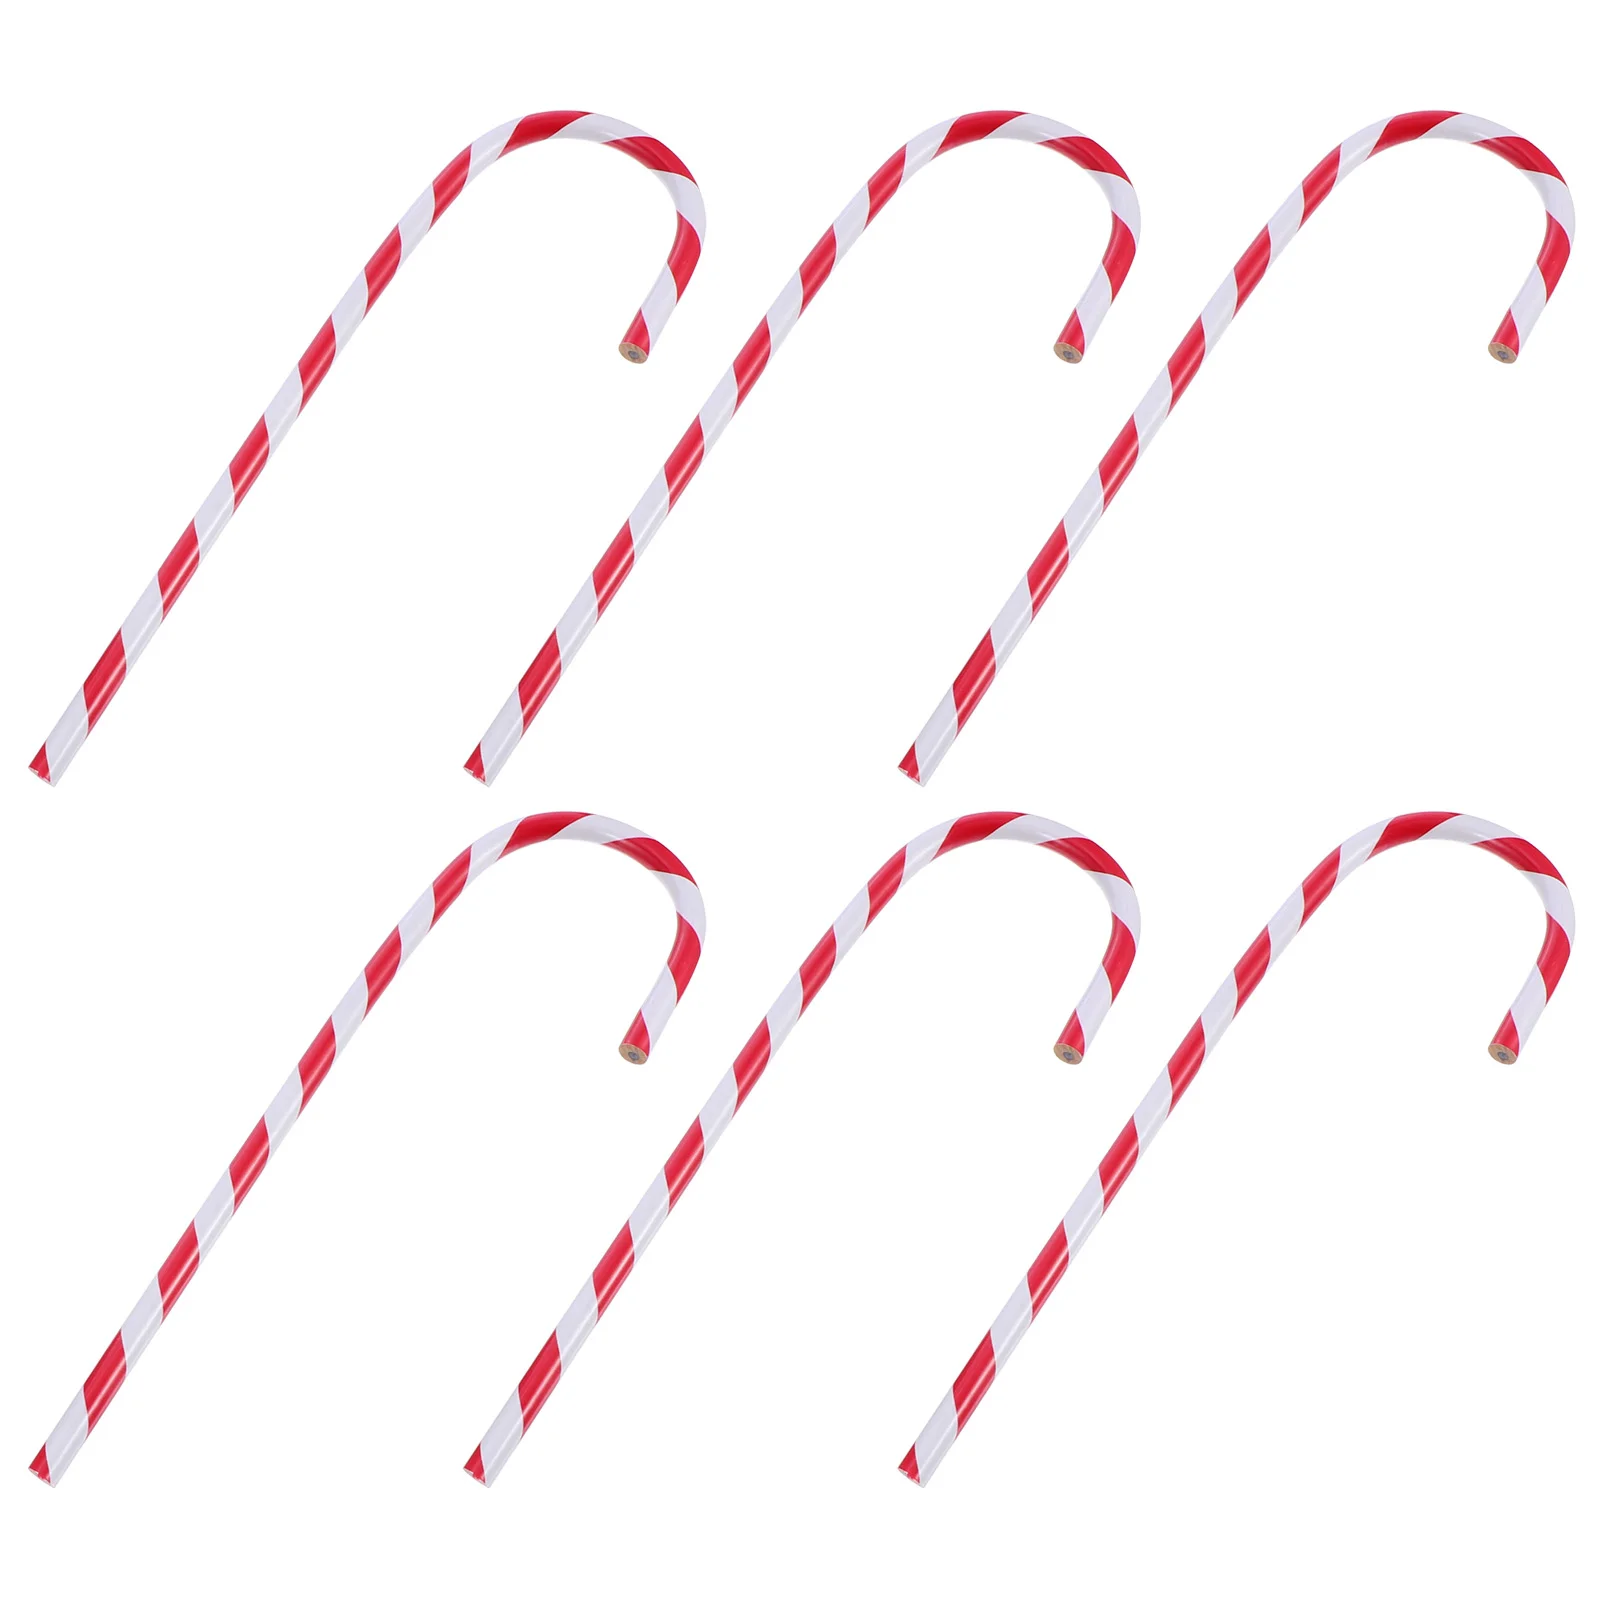 

6Pcs Candy Cane Wooden Novelty Pencils Stocking Stuffer Gift for Kids Children Boys Birthday Party Supplies Christmas